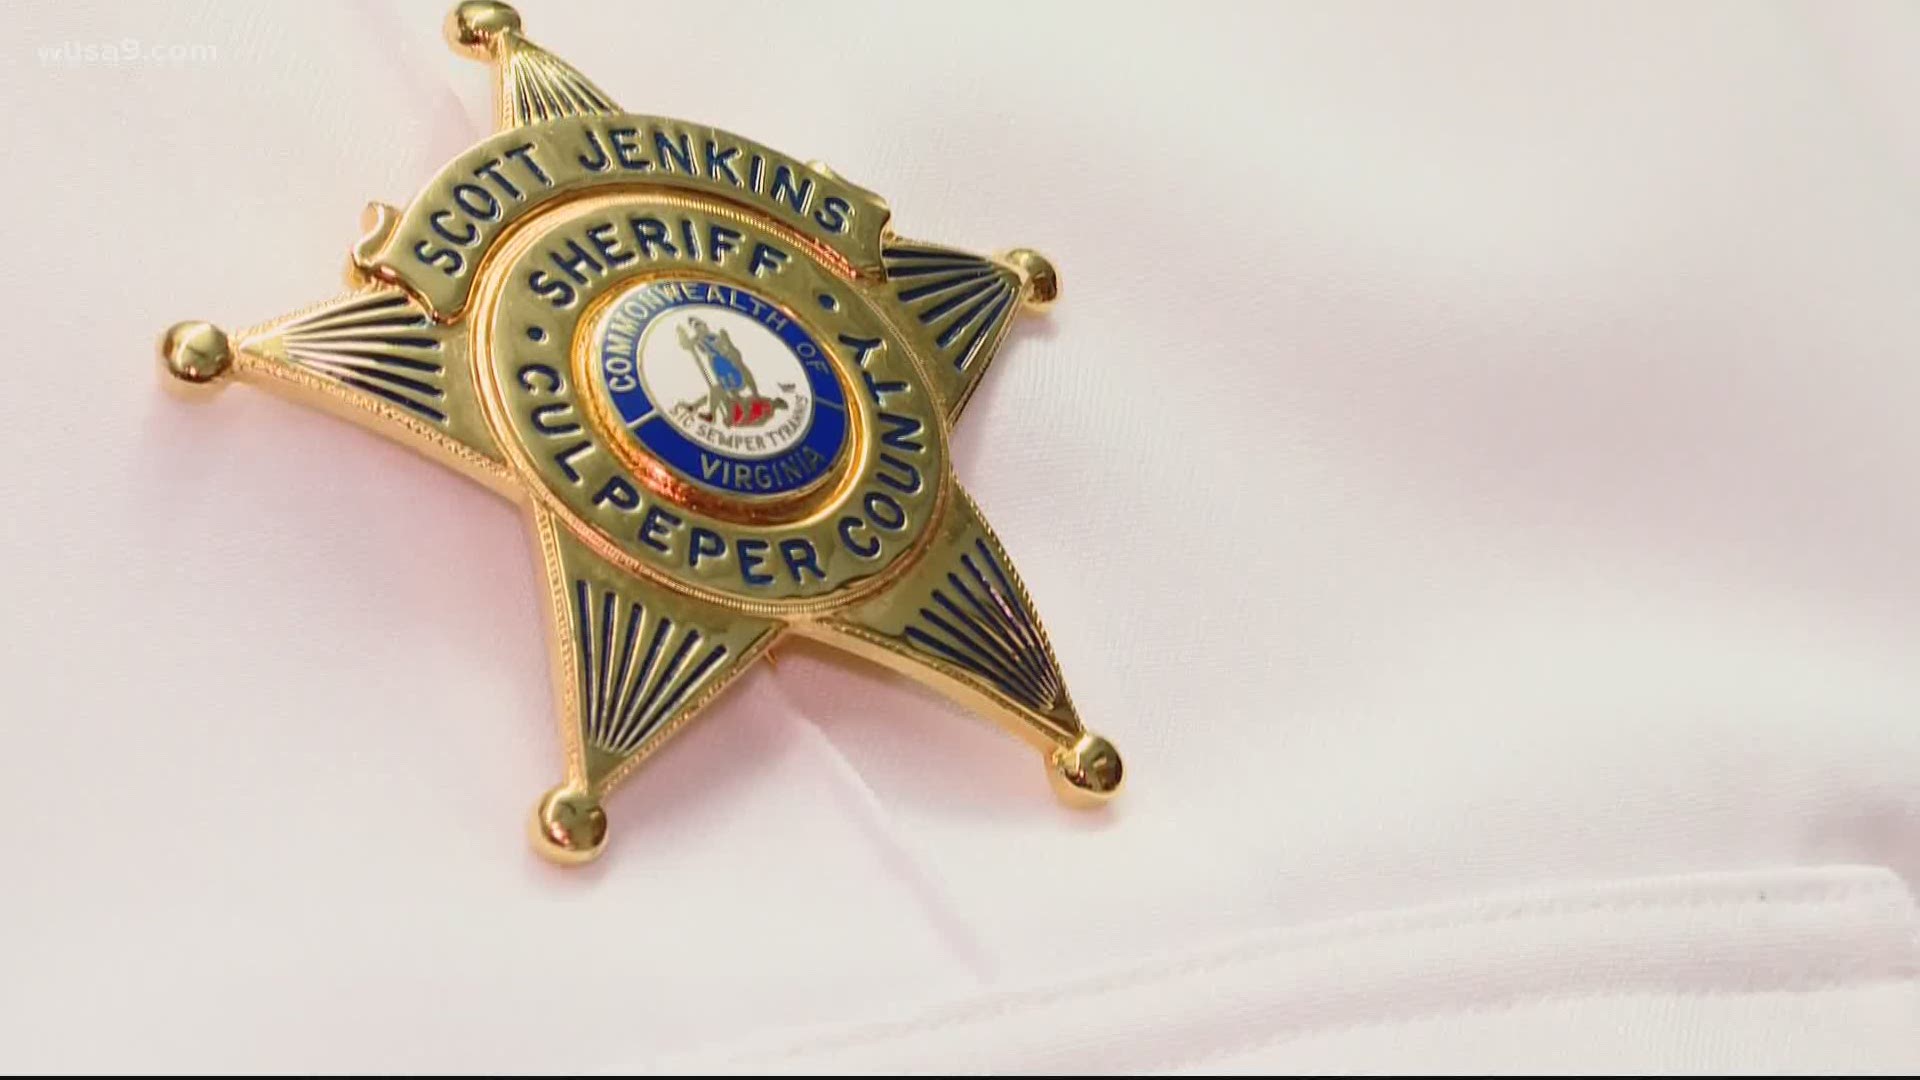 One Culpeper County man said he no longer feels safe, the county sheriff said this comes after citizen concerns and harassment against a deputy.